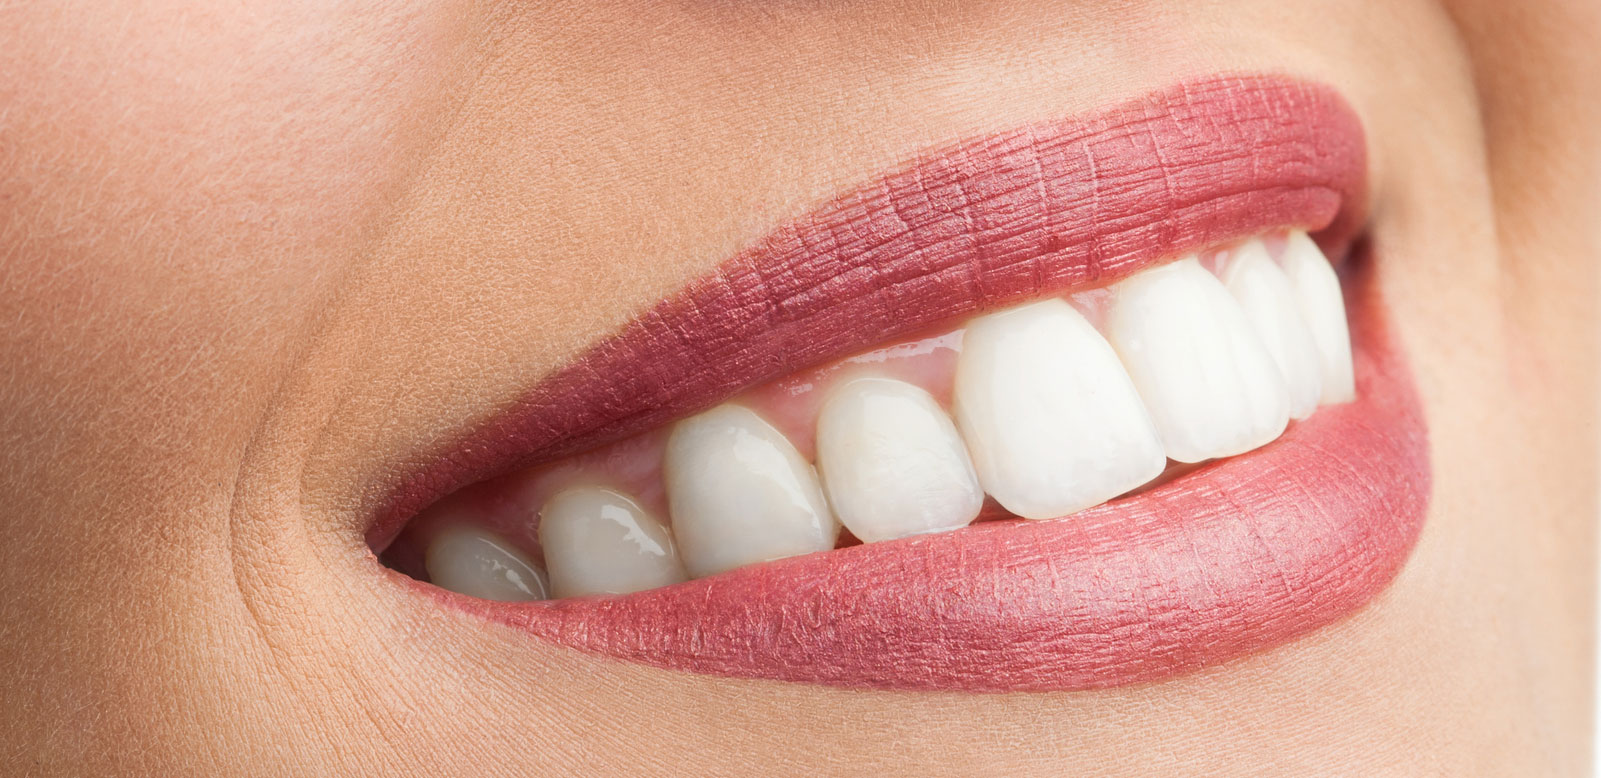 Beautiful teeth can sometimes be achieved via smile enhancement by a dentist or dental specialist